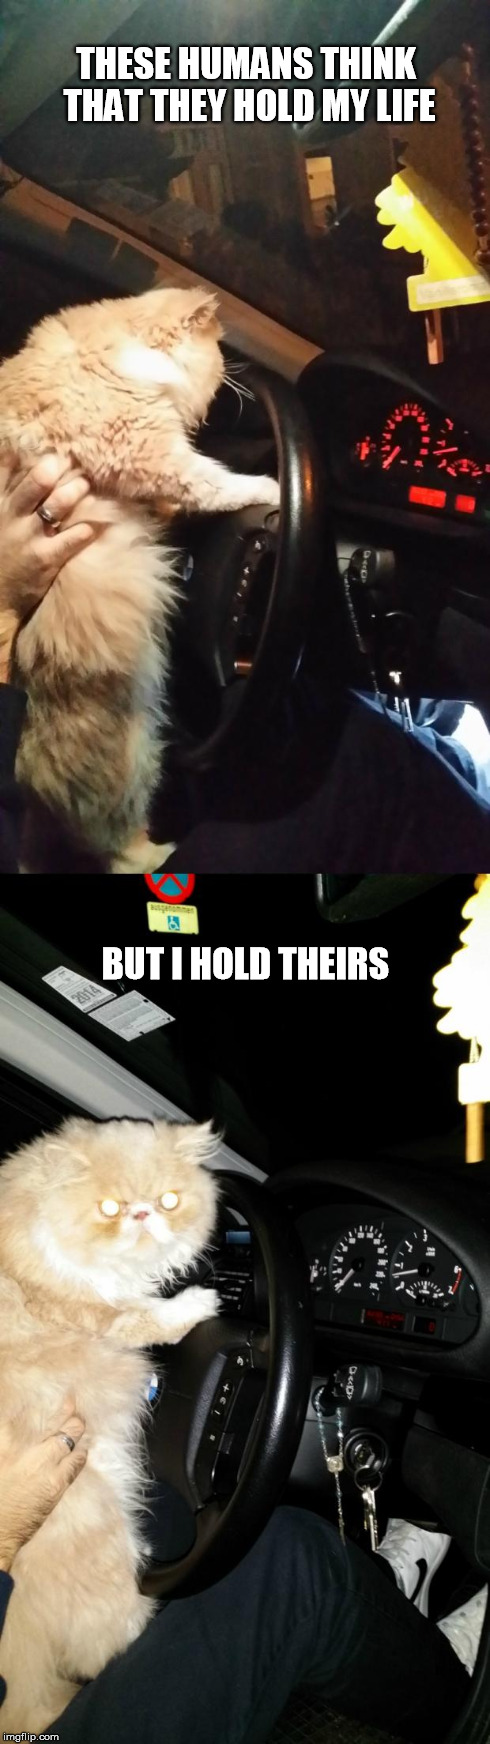 Driving Cat | THESE HUMANS THINK THAT THEY HOLD MY LIFE BUT I HOLD THEIRS | image tagged in driving cat | made w/ Imgflip meme maker